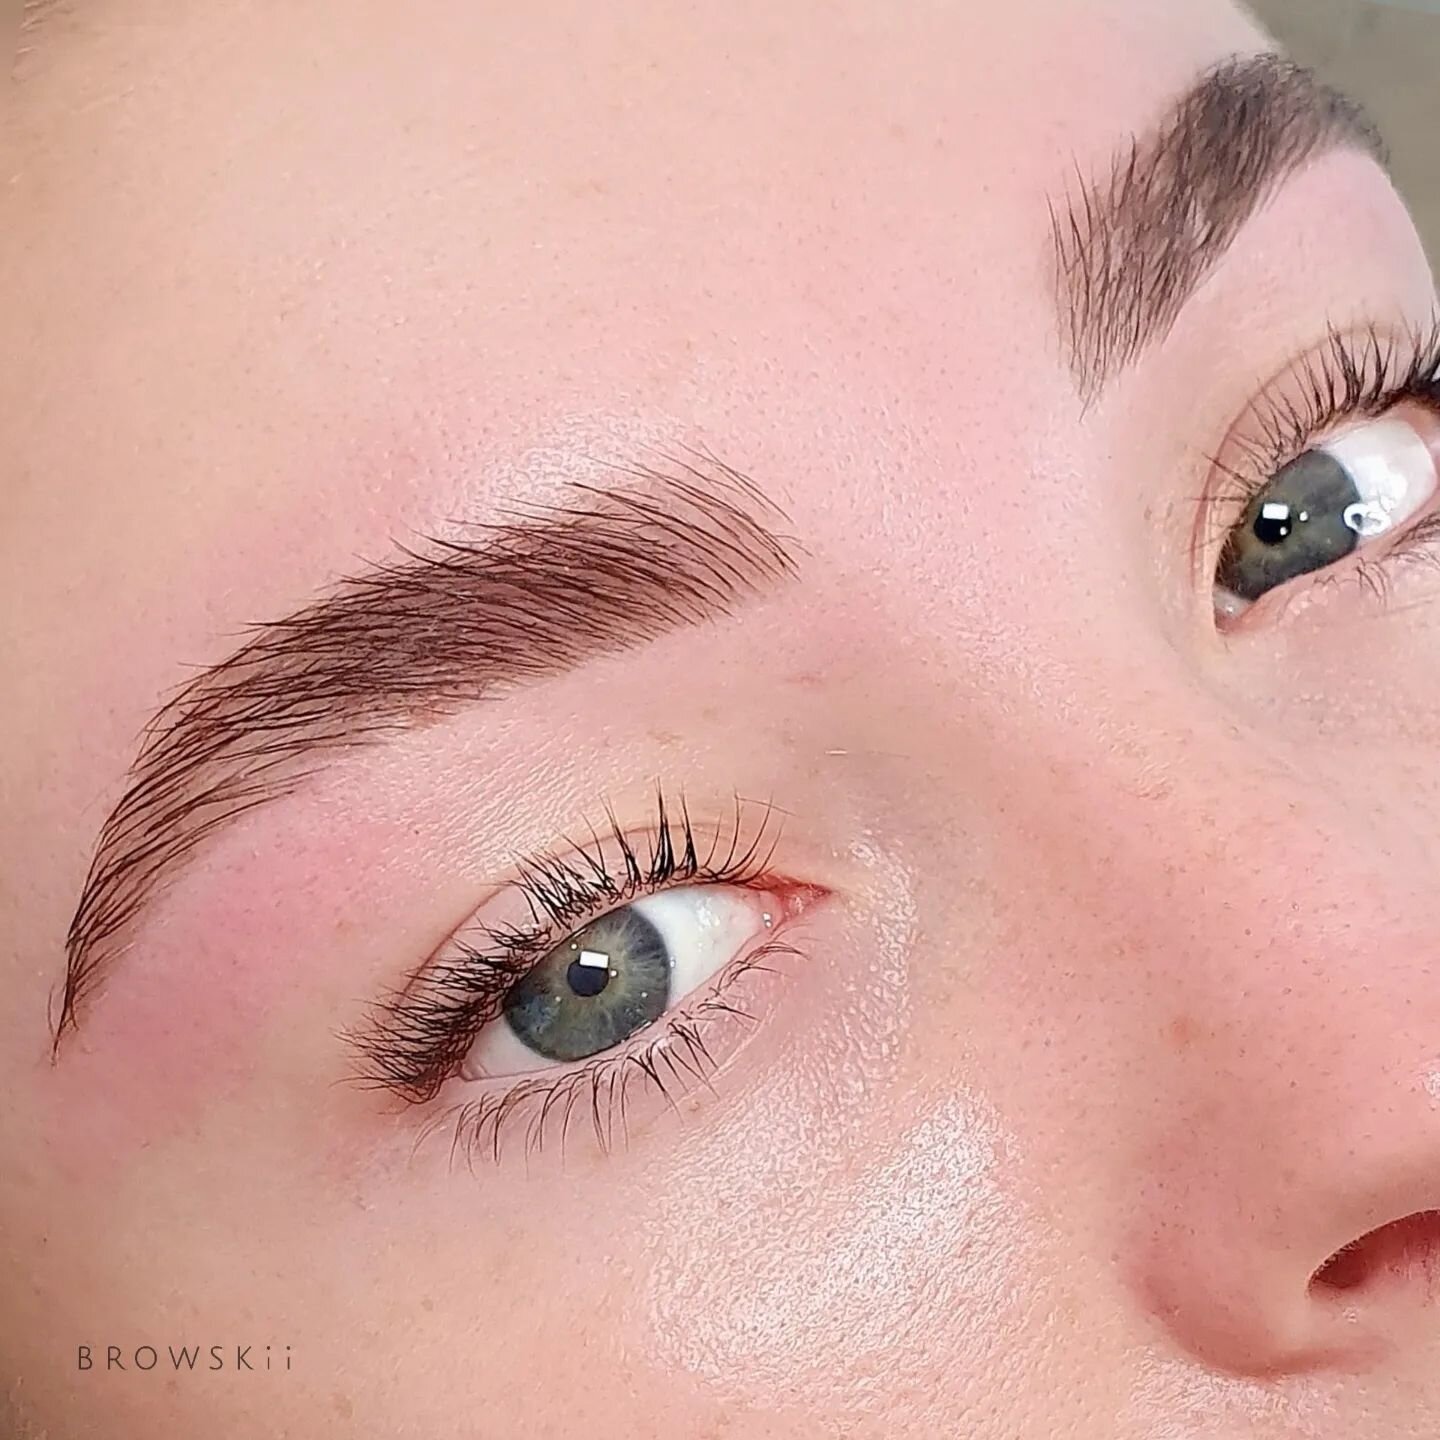 An easy and quick perk me up could be as simple as getting a brow sculpt n tint. 

Frames your face and gets you ready in seconds in the morning.